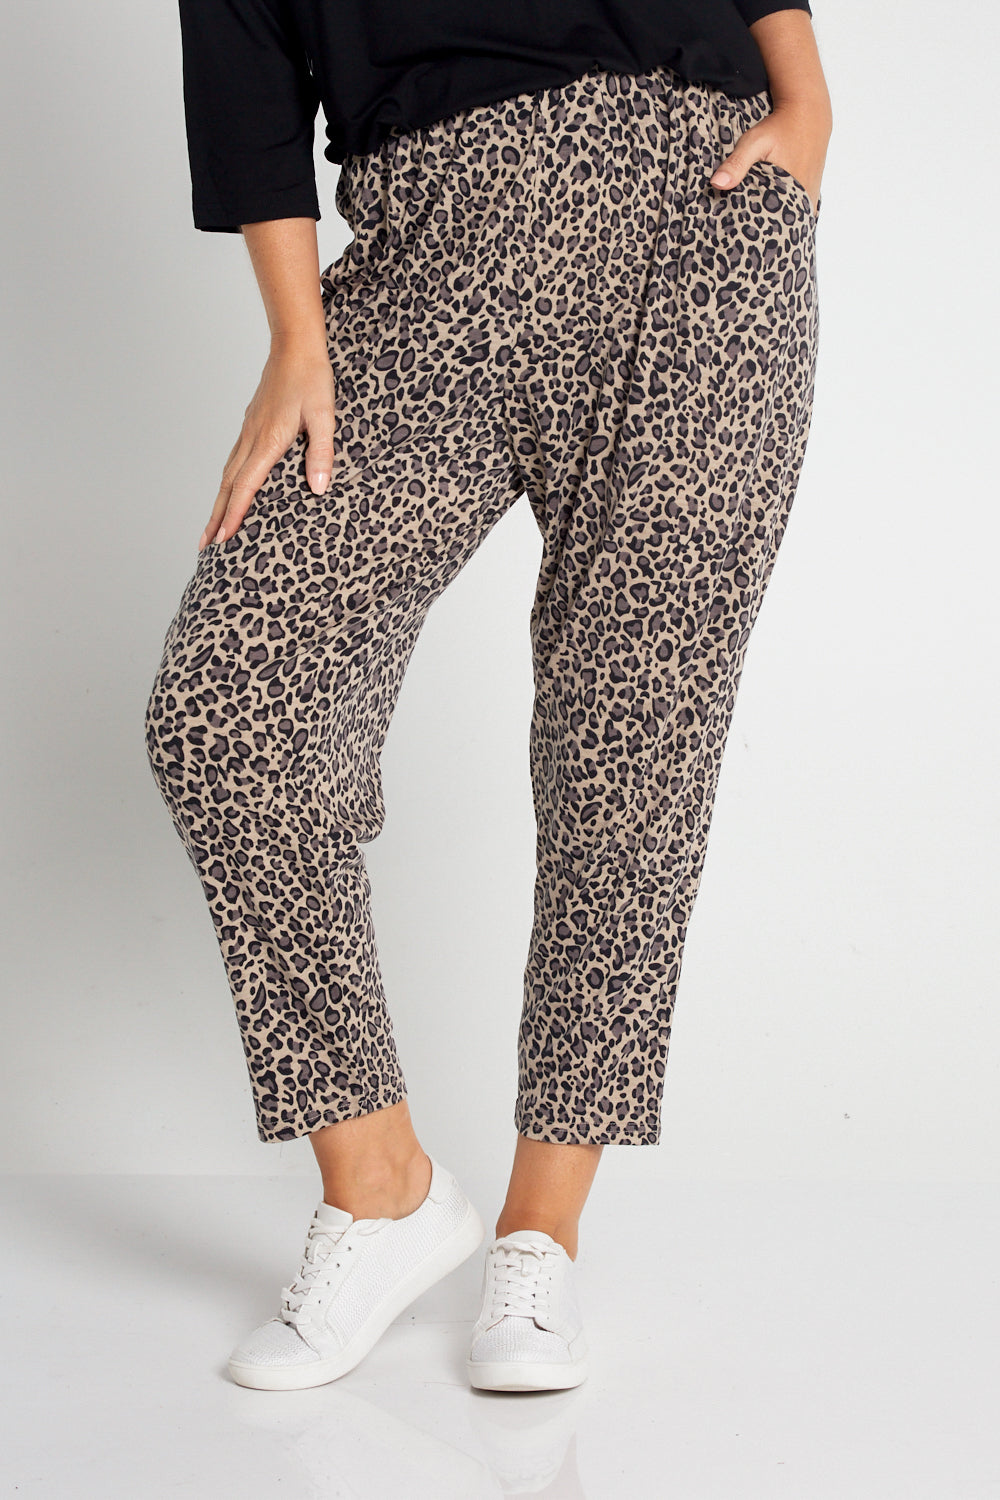 Buy Pants Roberto Cavalli animal-print straight-leg trousers (QKT200FY077)  | Luxury online store First Boutique